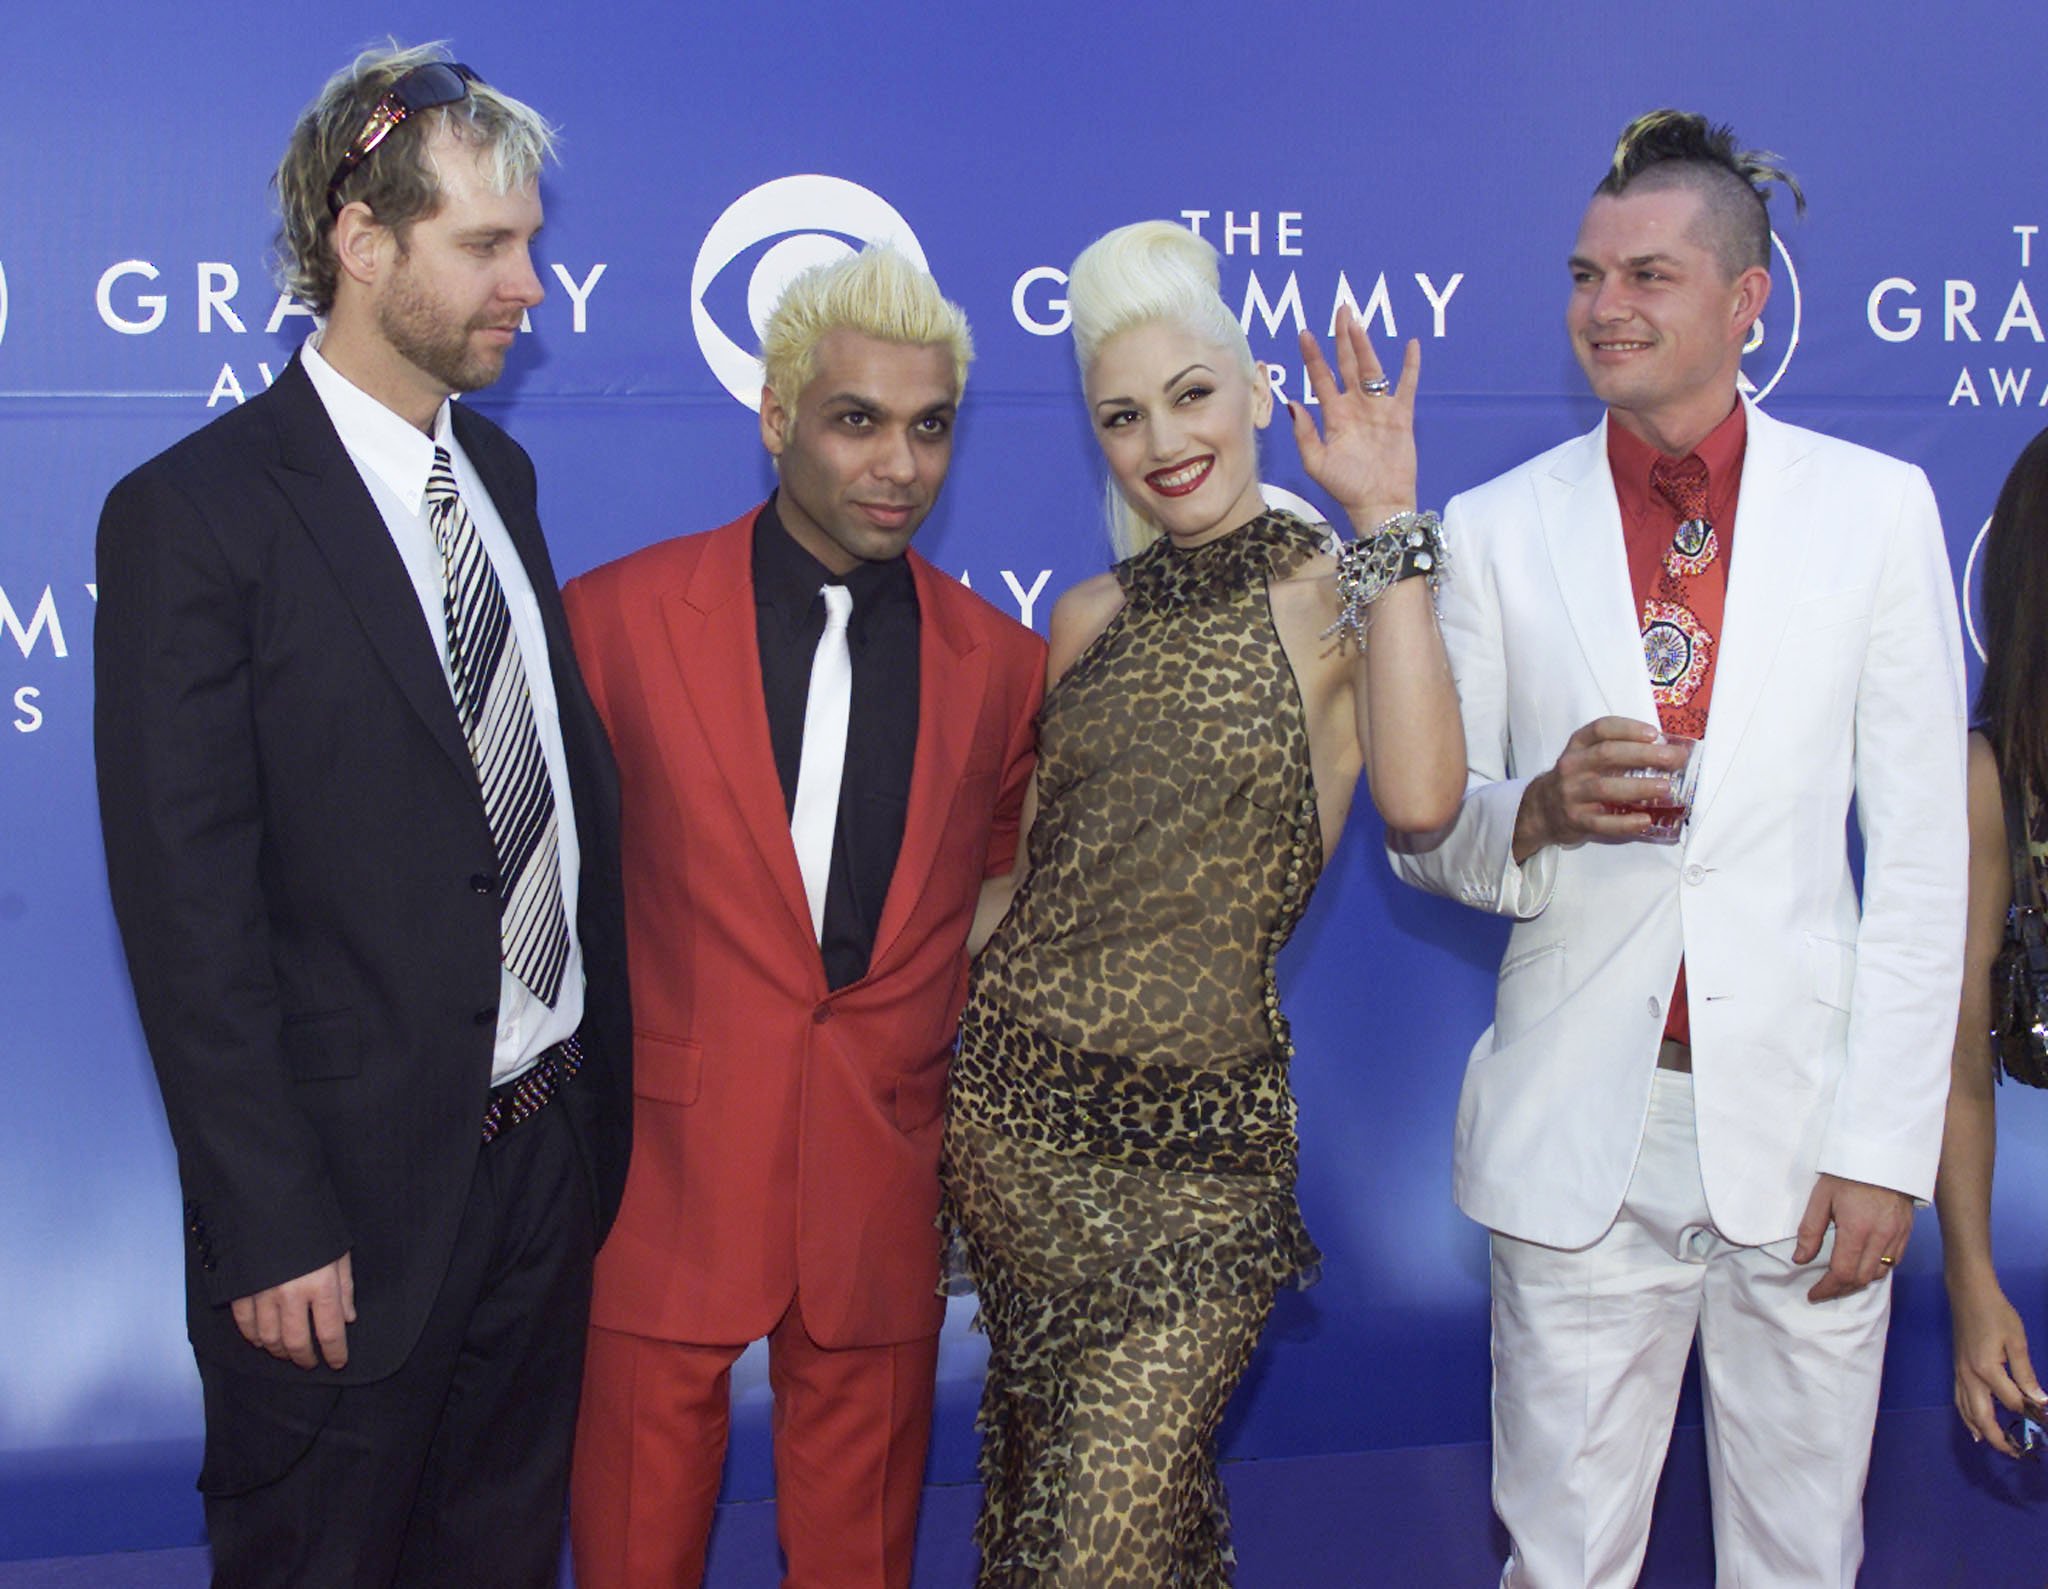 Adrian, Tom, Gwen, and Tony pose for a group photo at an event in February 2002